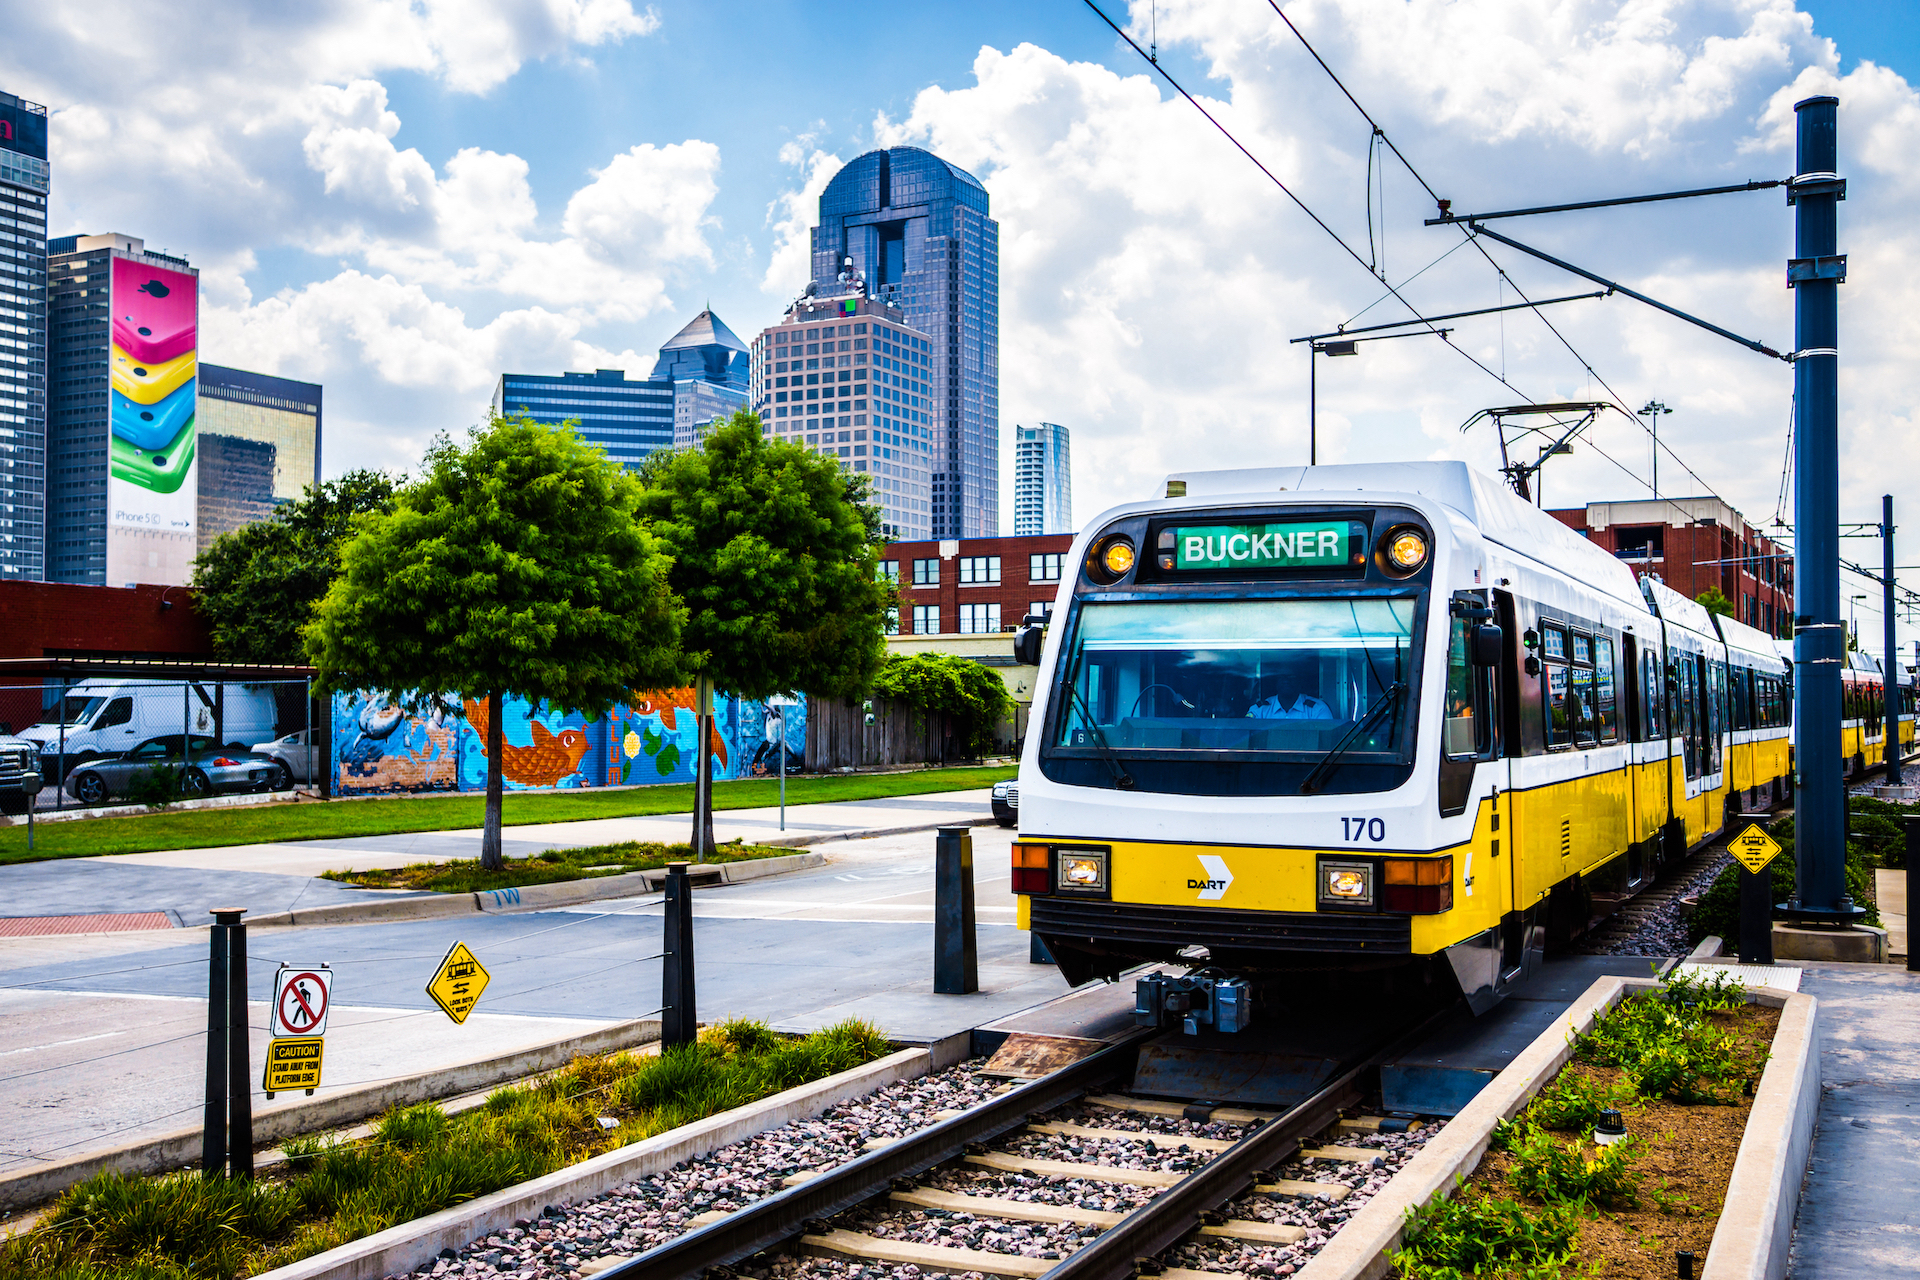 Secure Dallas Area Rapid Transit Awards Security Contract to Inter-Con